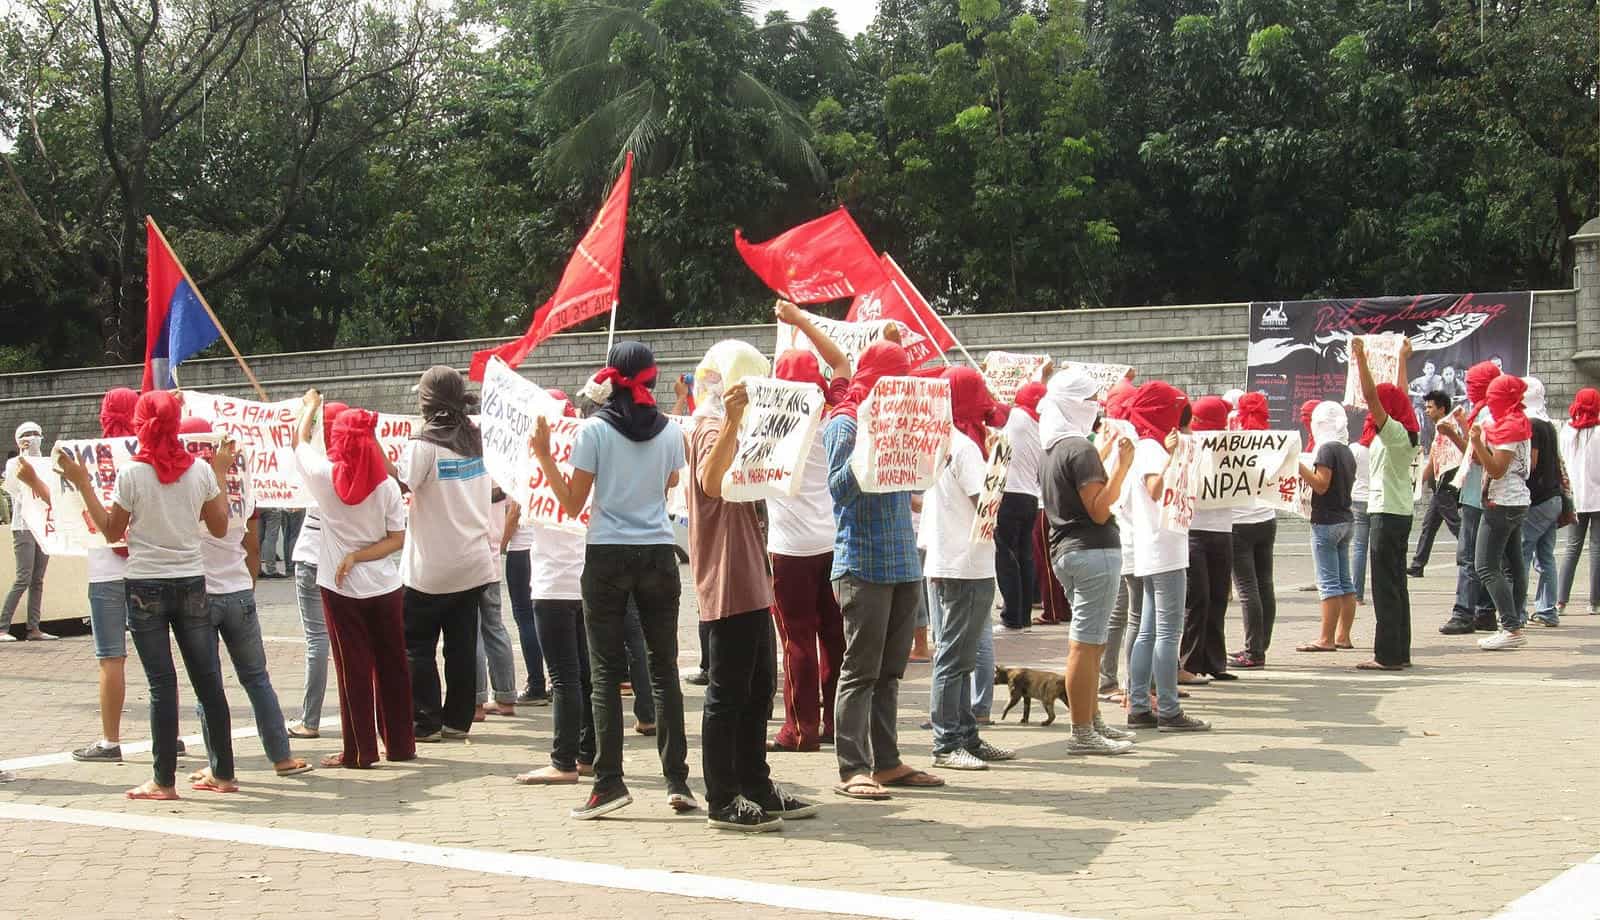 Student activists on PUP (Polytechnic University of the Philippines), taken by Ace Mendiola. Source- Wikipedia.